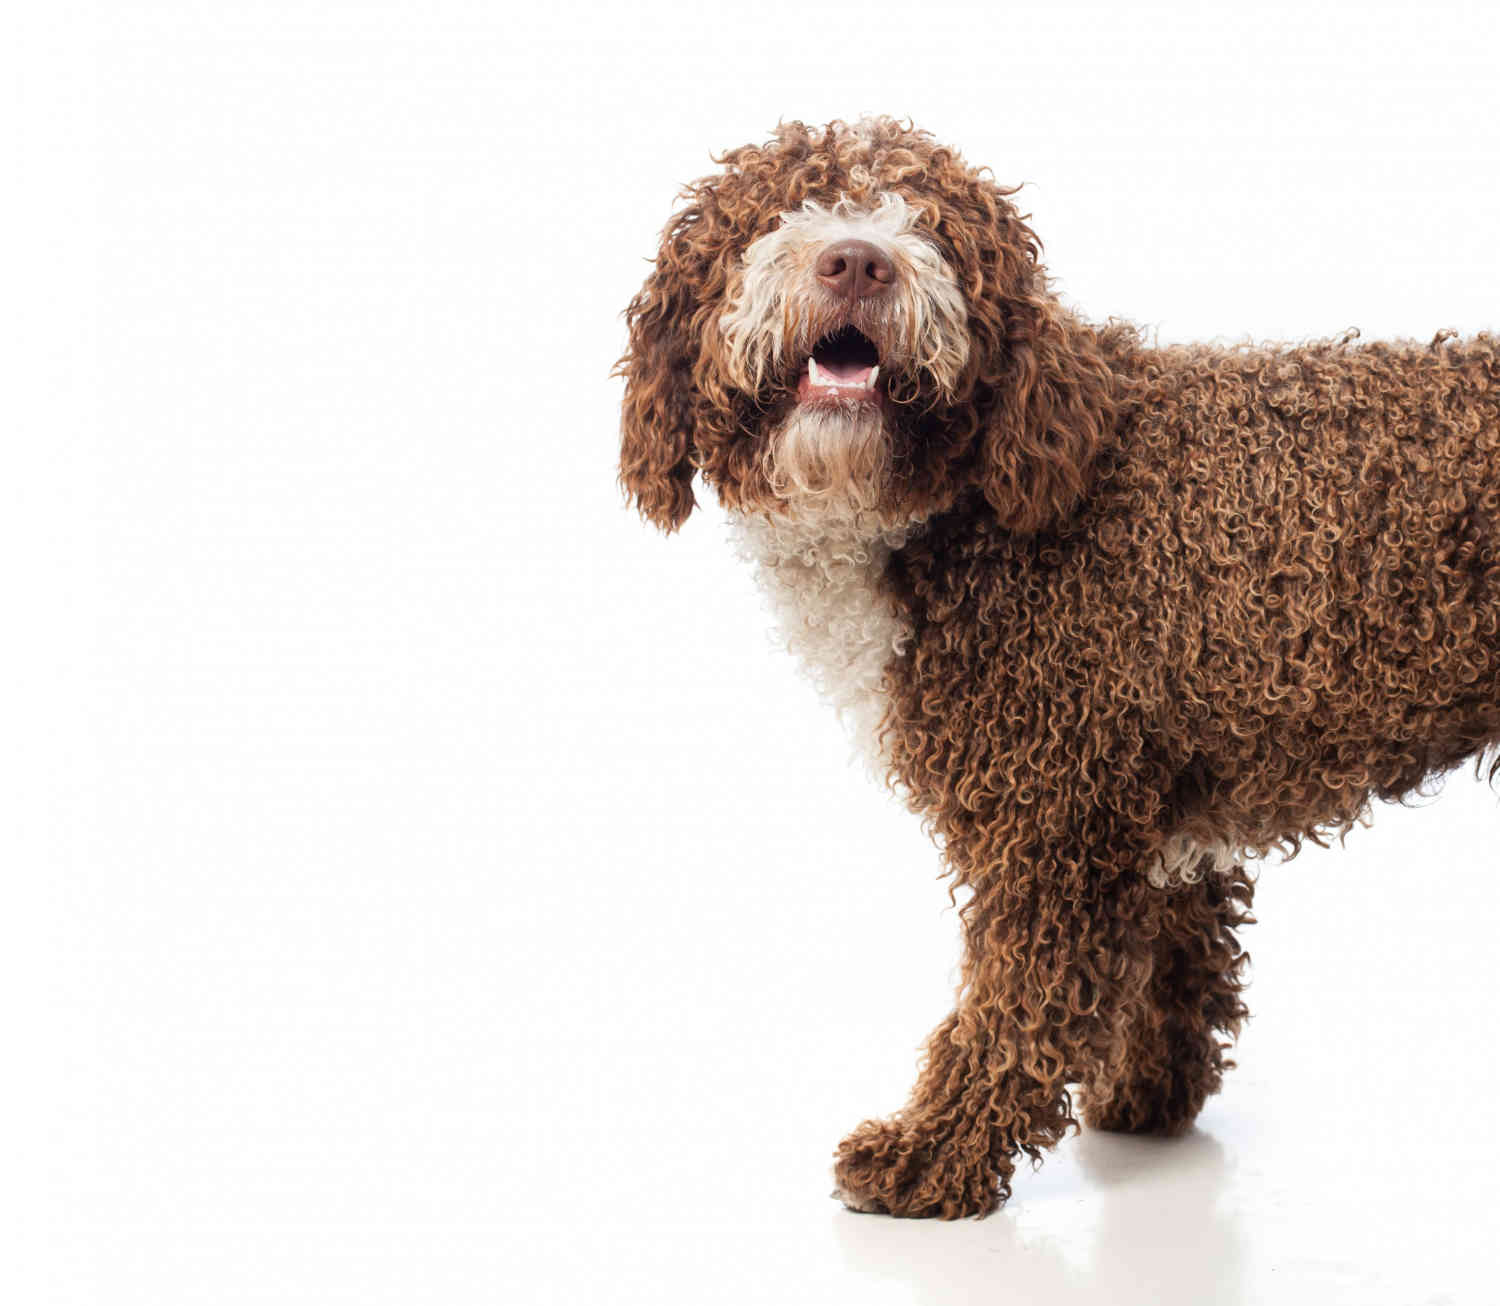 Leaving Your Goldendoodle Alone: How Long is Too Long?